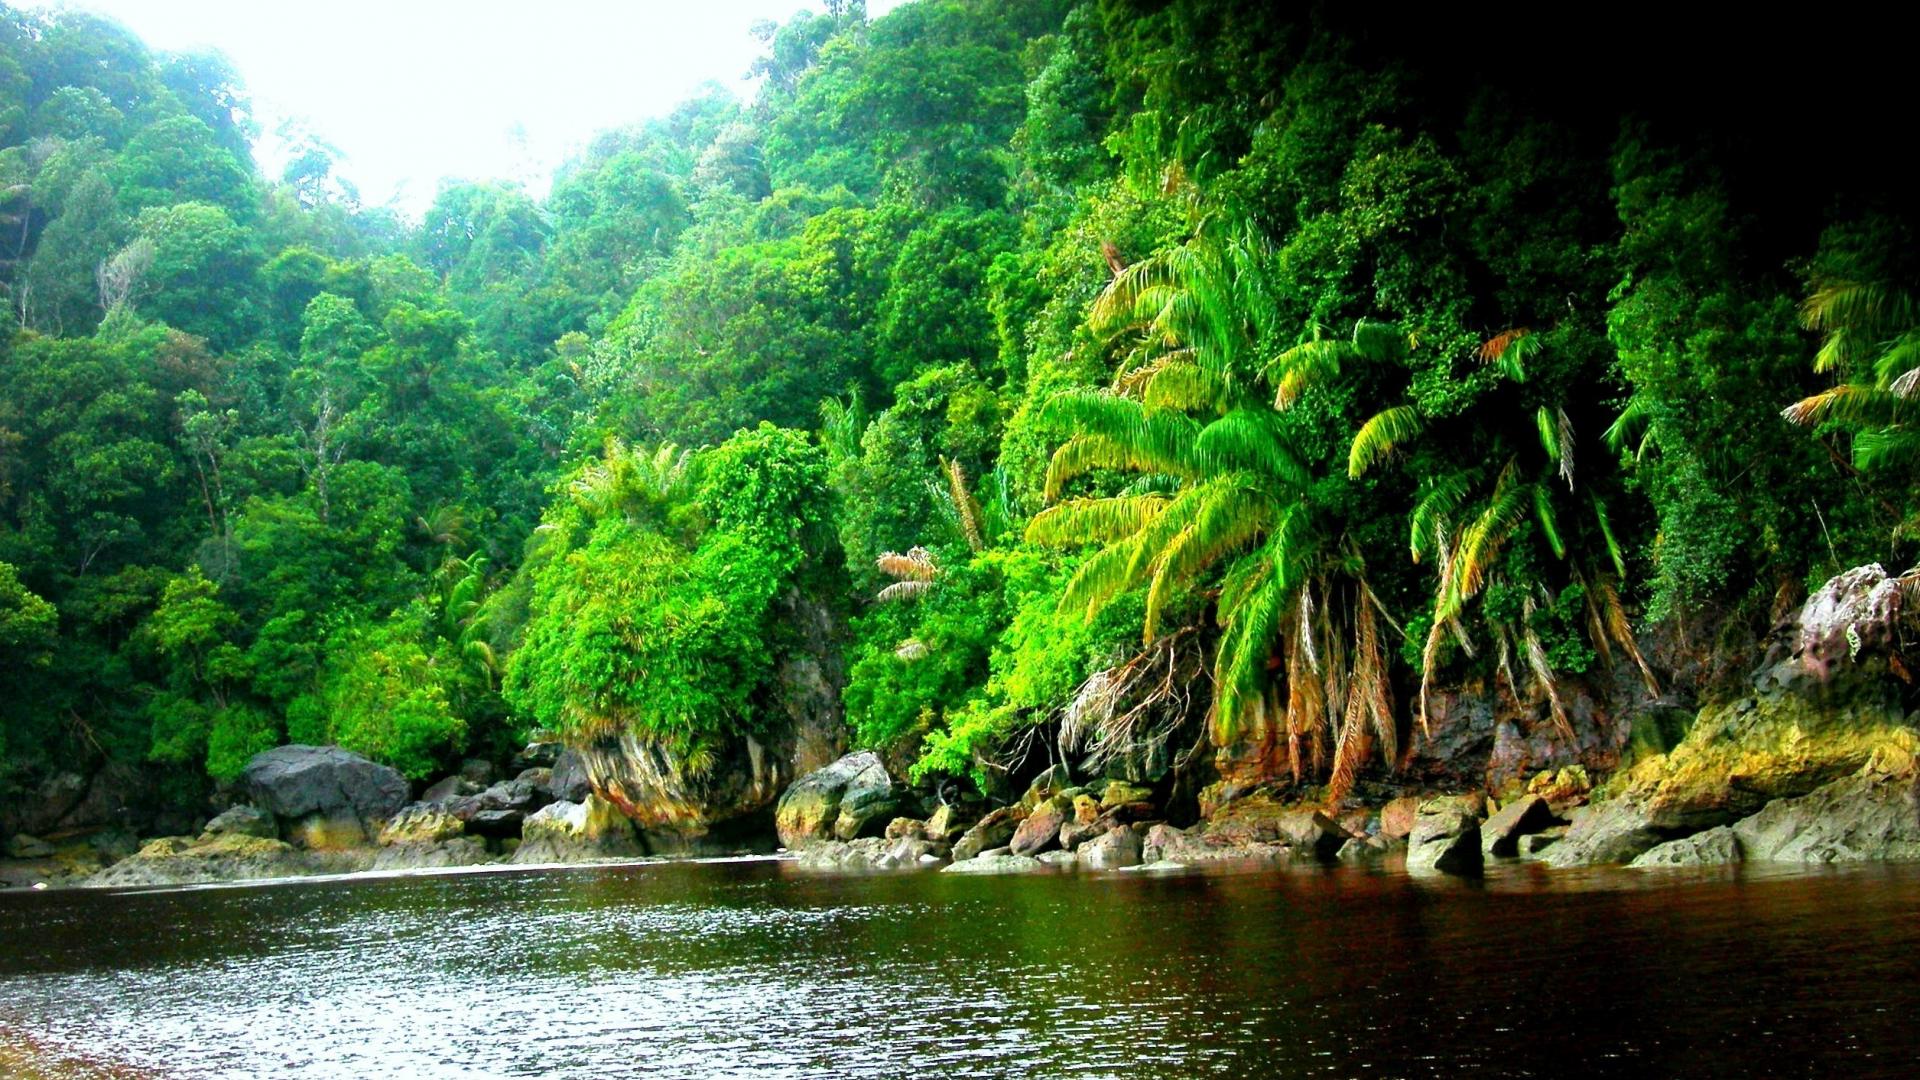 Download Jungle wallpapers for mobile phone free Jungle HD pictures